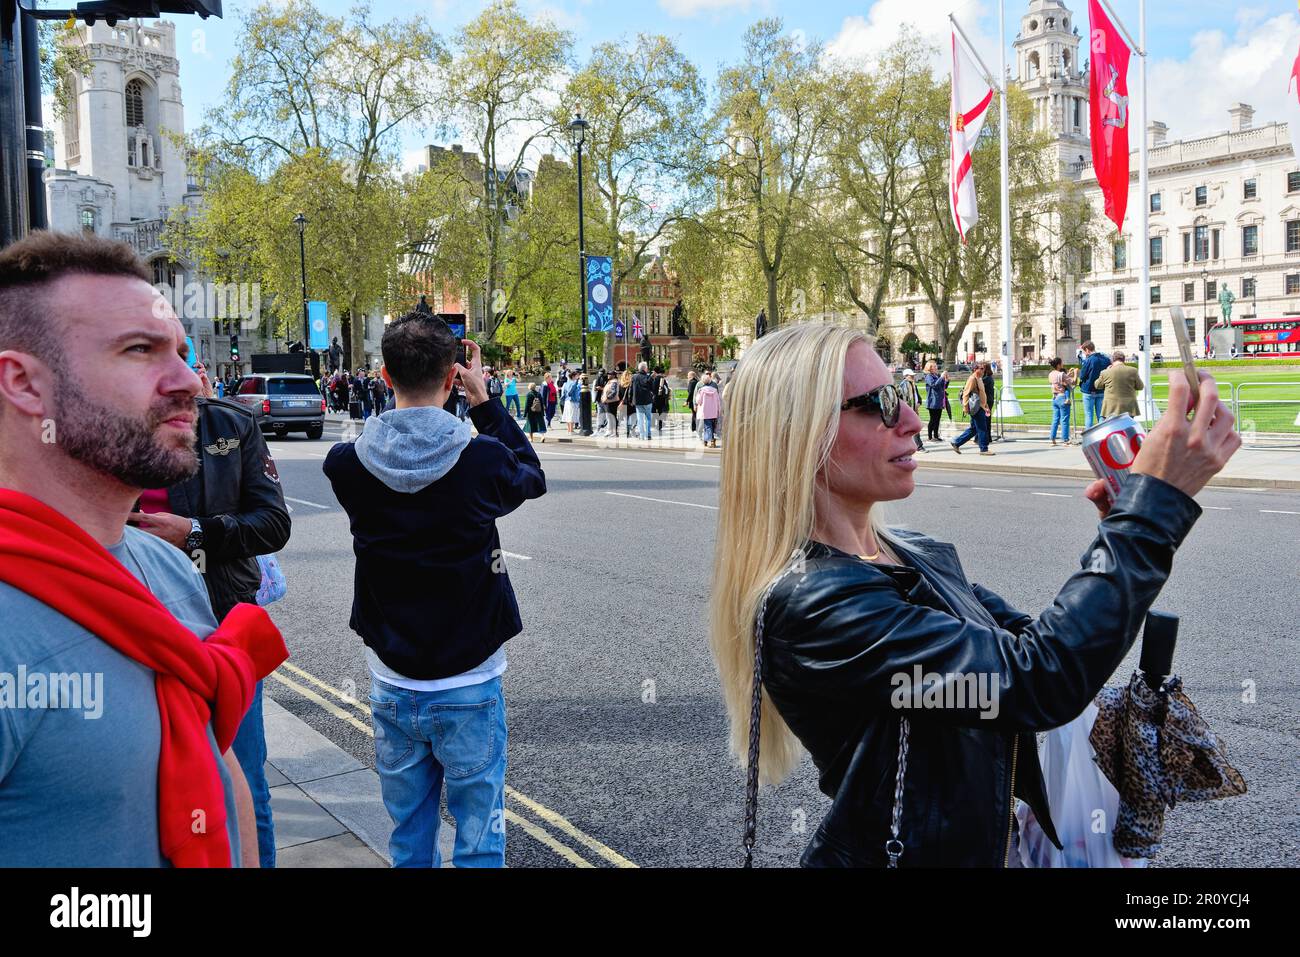 Tourists taking photographs in Parliament Square Westminster Central London on a sunny spring day, England Great Britain UK Stock Photo